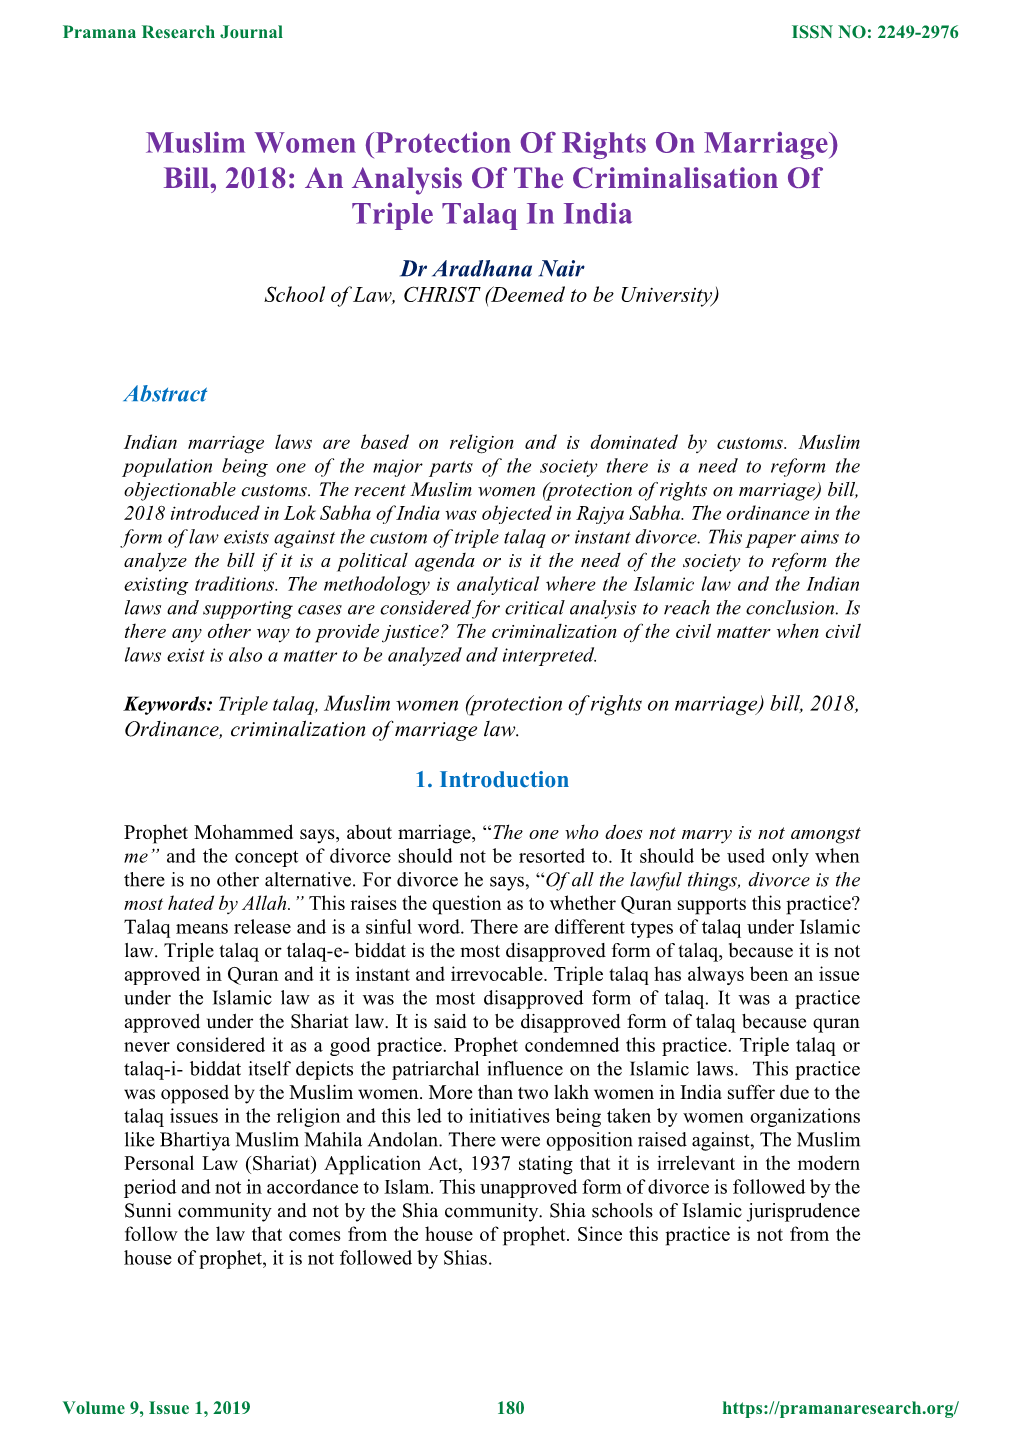 Muslim Women (Protection of Rights on Marriage) Bill, 2018: an Analysis of the Criminalisation of Triple Talaq in India